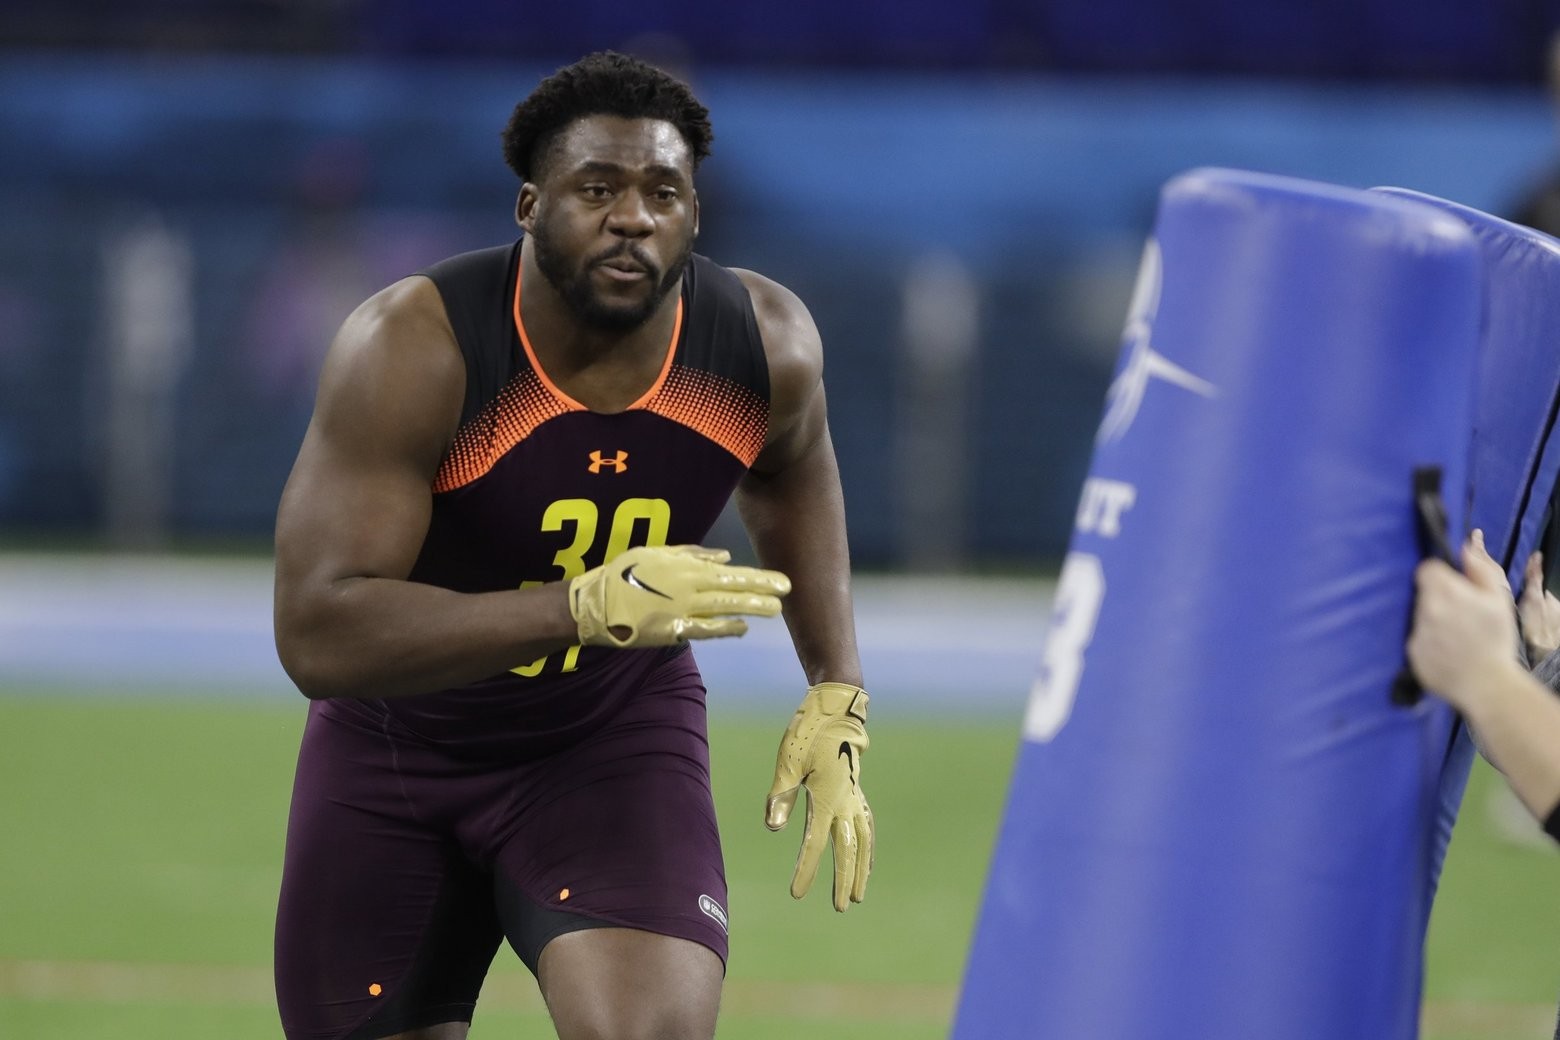 Get to know L.J. Collier, the Seahawks’ firstround NFL draft pick from TCU